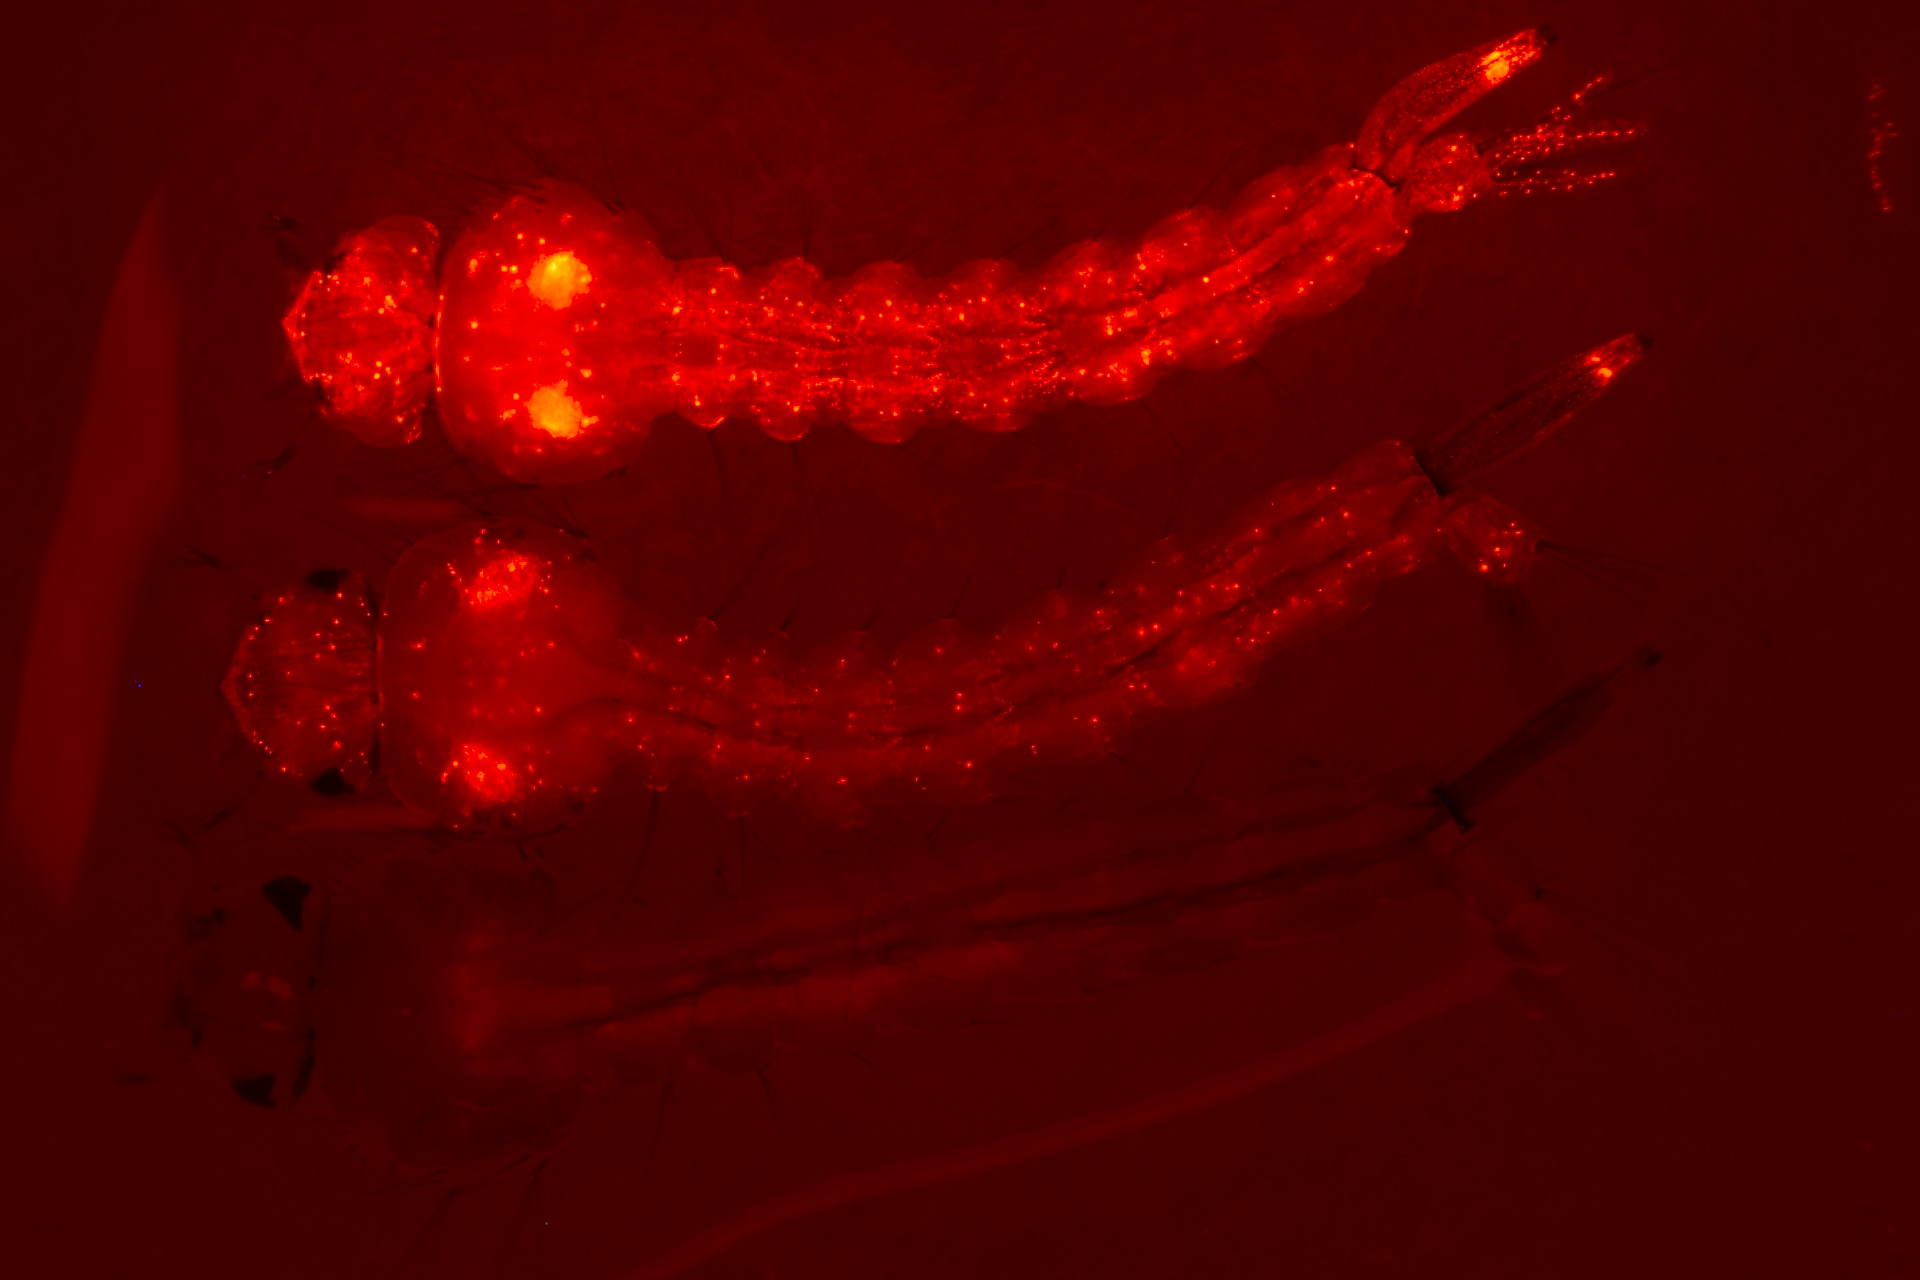 Red fluorescent larvae of the southern house mosquito (Culex quinquefasciatus Say) 